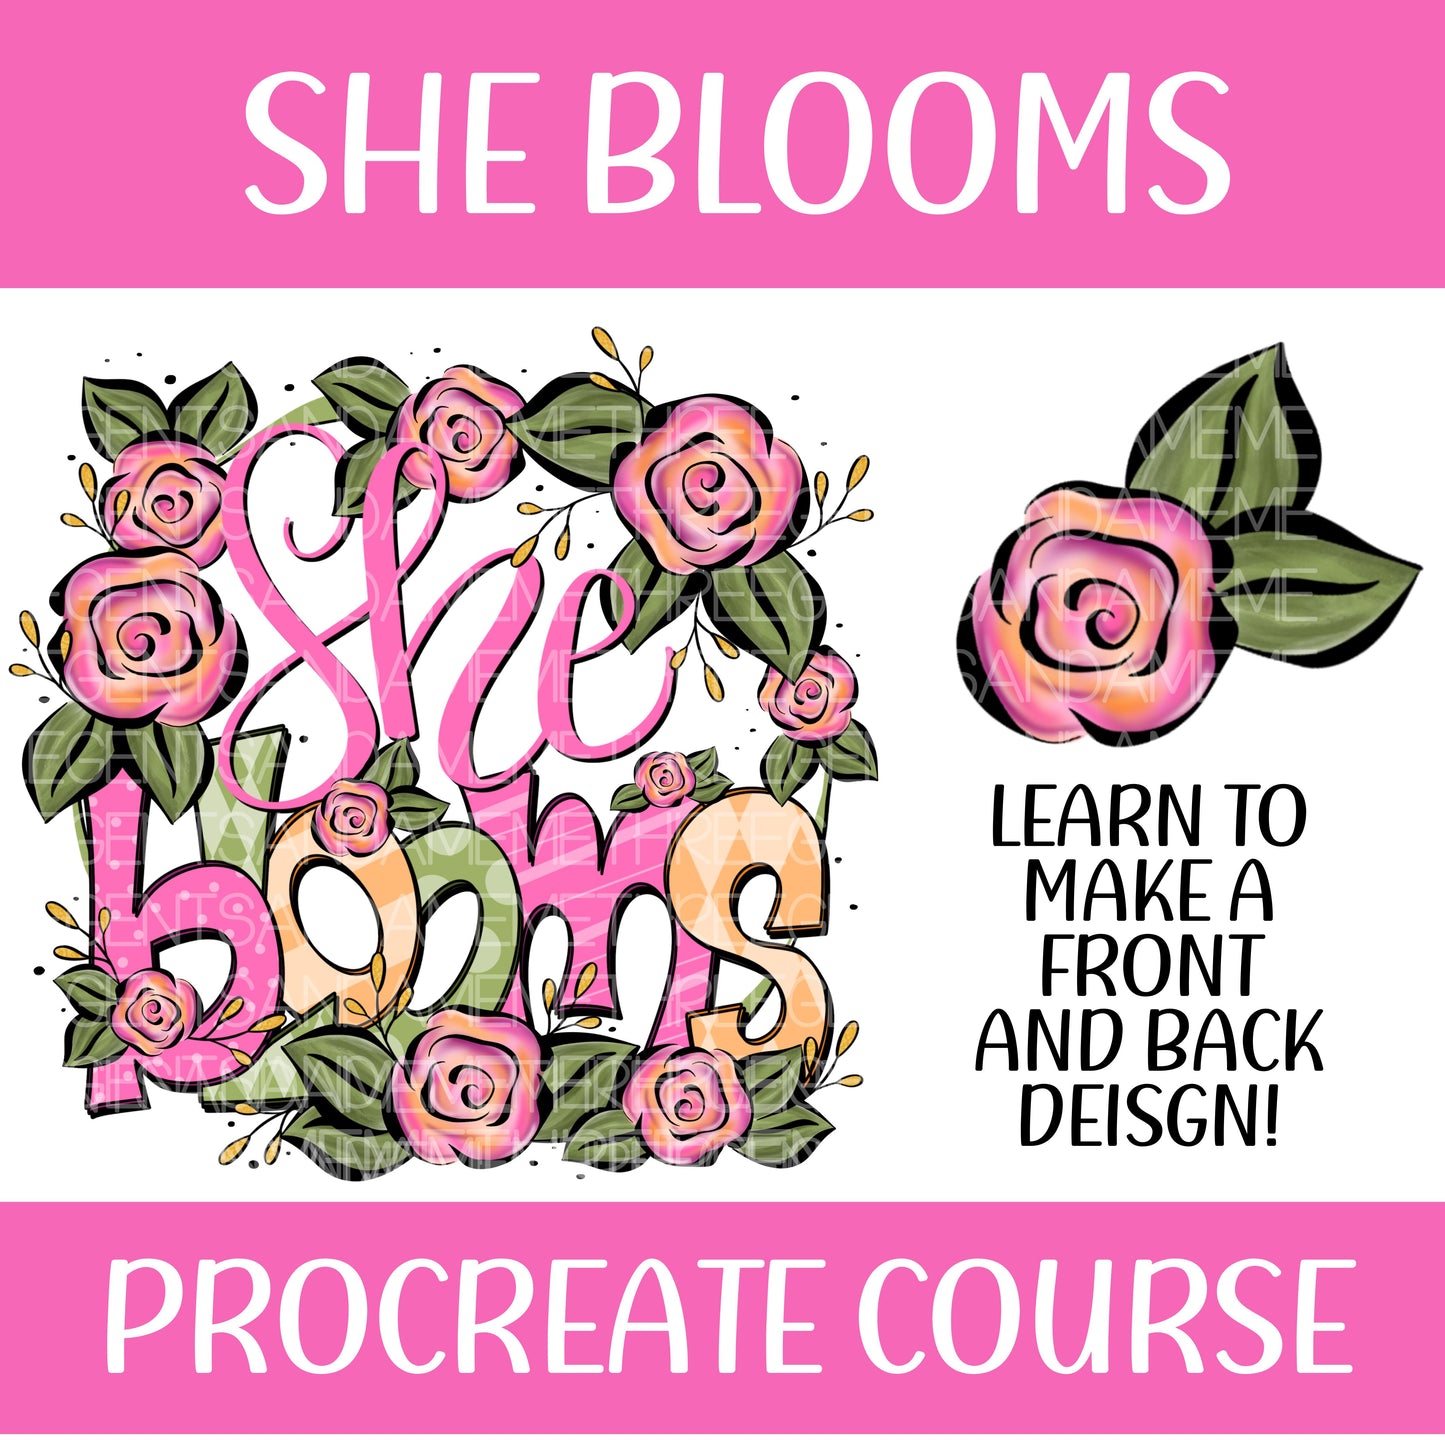 SHE BLOOMS PROCREATE COURSE